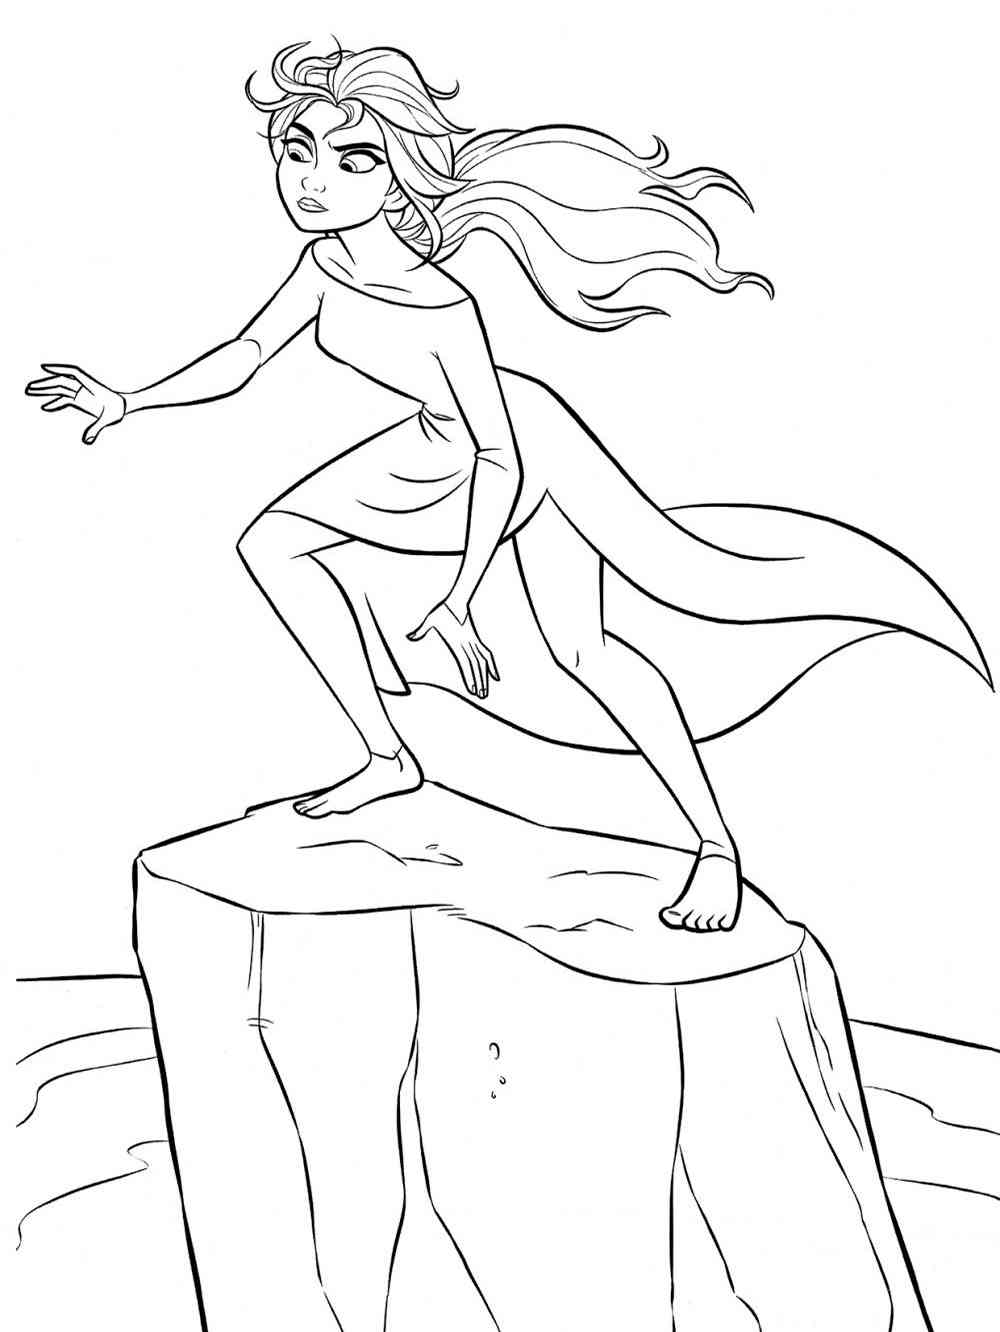 Frozen 11 coloring page